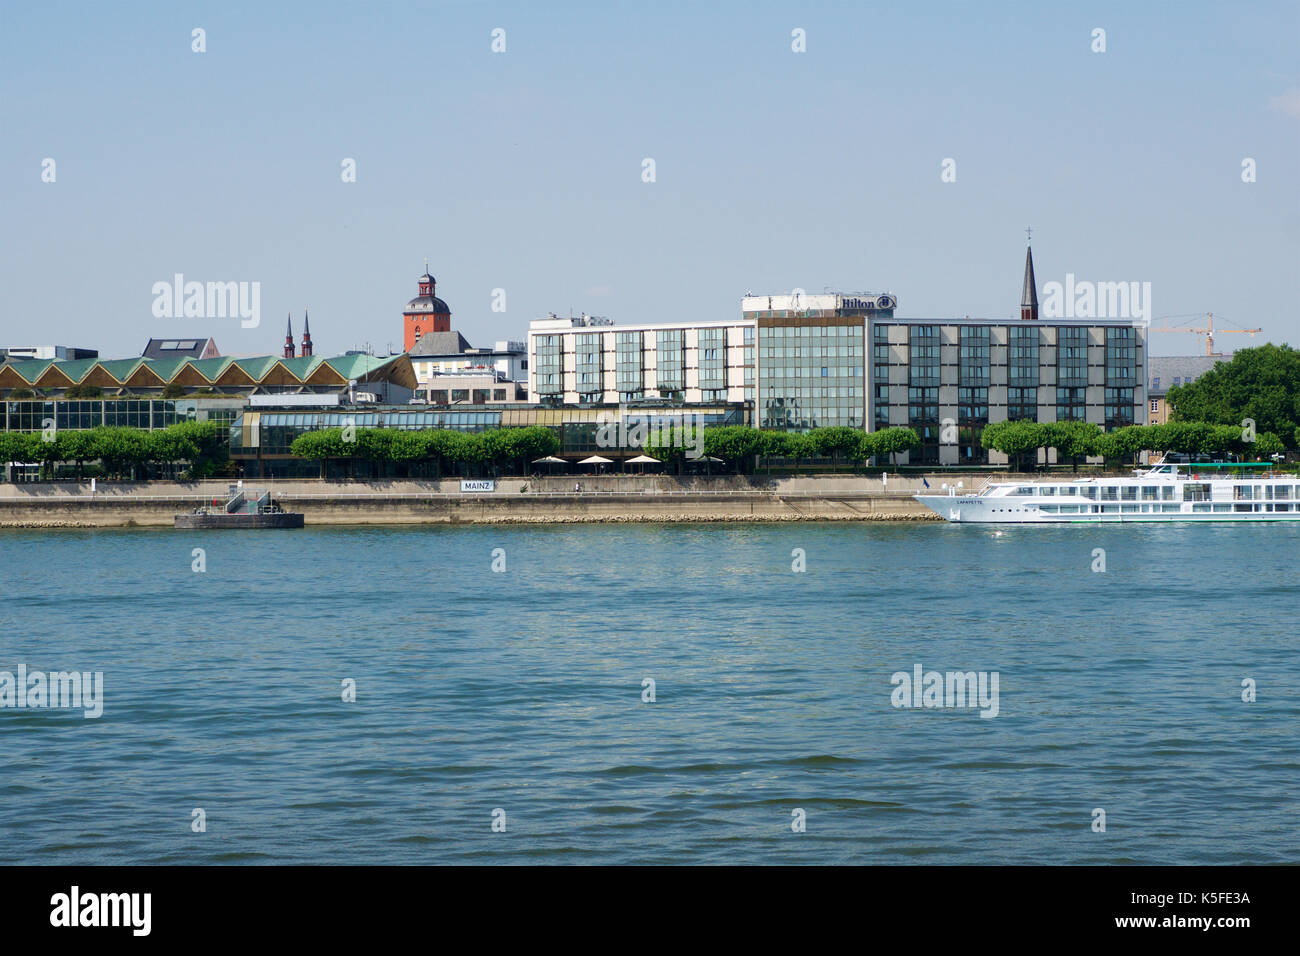 MAINZ, GERMANY - JUL 09th, 2017: Luxury Hilton Hotel next to the Rhine german Rhein. Outside view from the opposite river side. Hilton Hotels Resorts is an international chain of full service hotels and resorts of Hilton Worldwide. Stock Photo